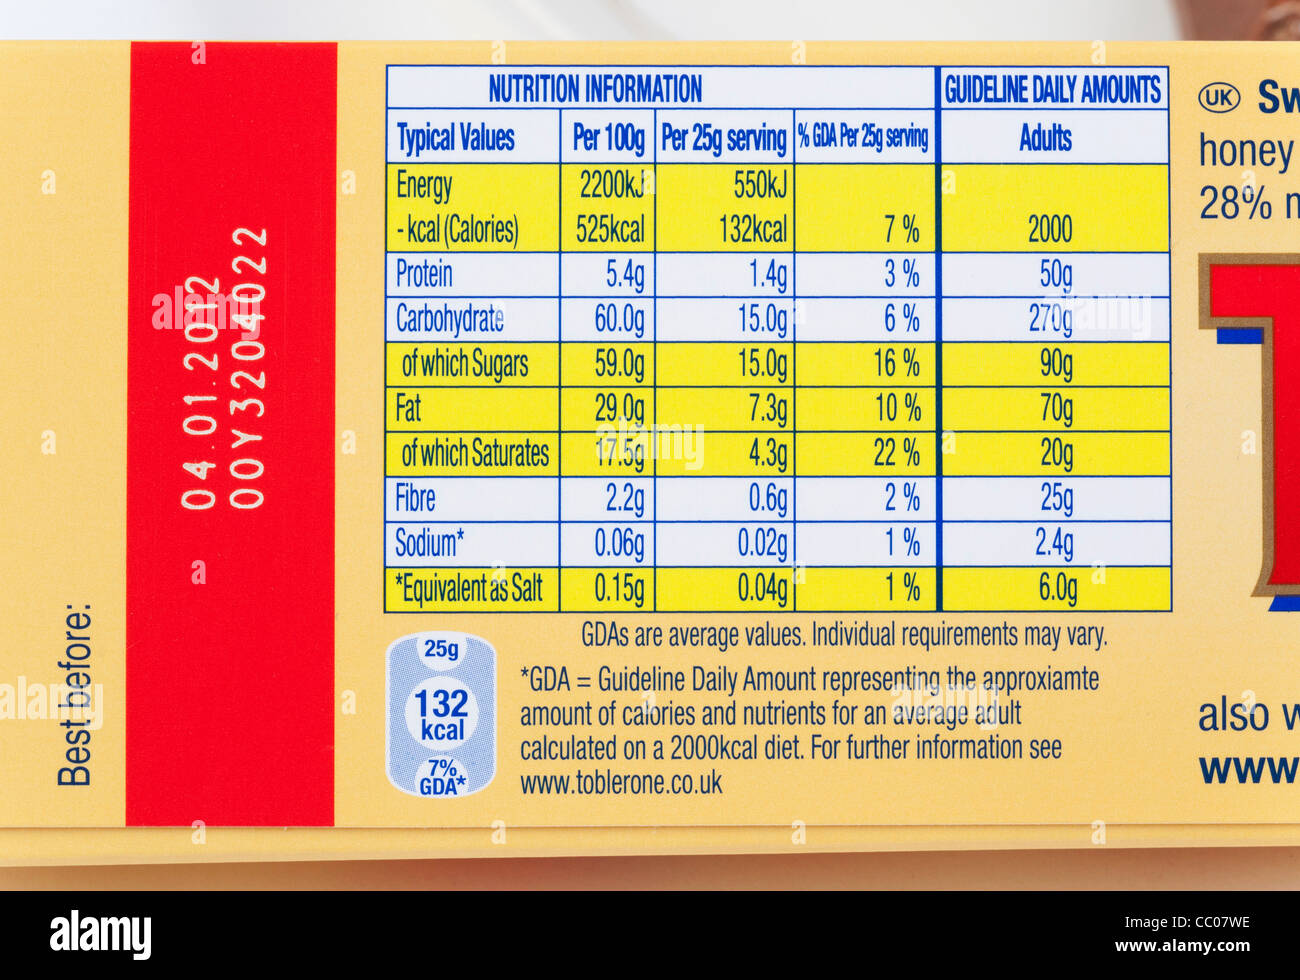 nutritional content of Toblerone chocolate bar Stock Photo